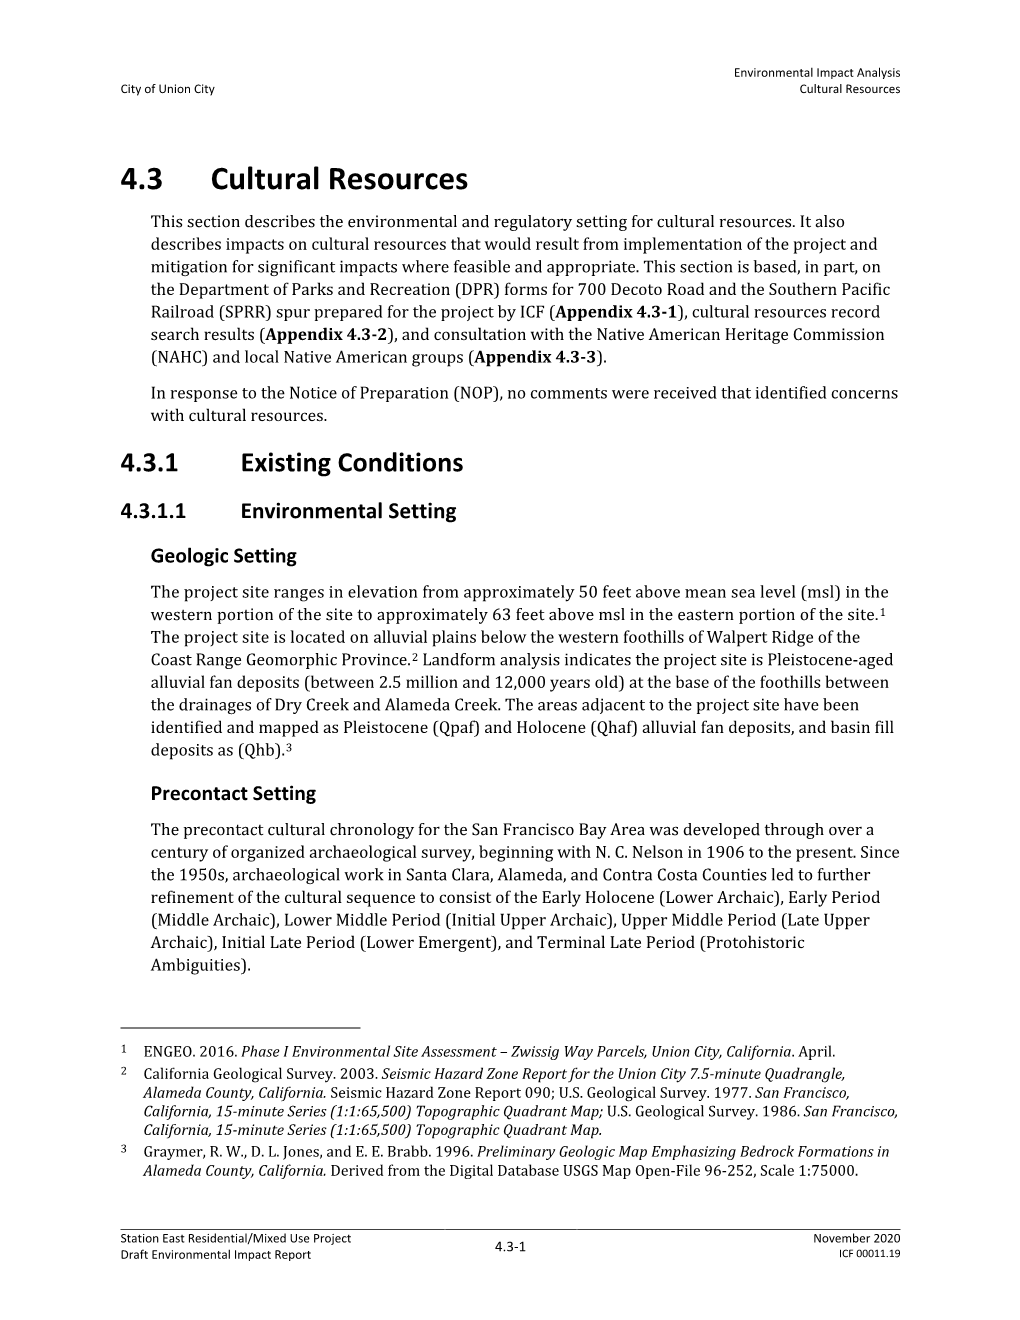 4.3 Cultural Resources This Section Describes the Environmental and Regulatory Setting for Cultural Resources